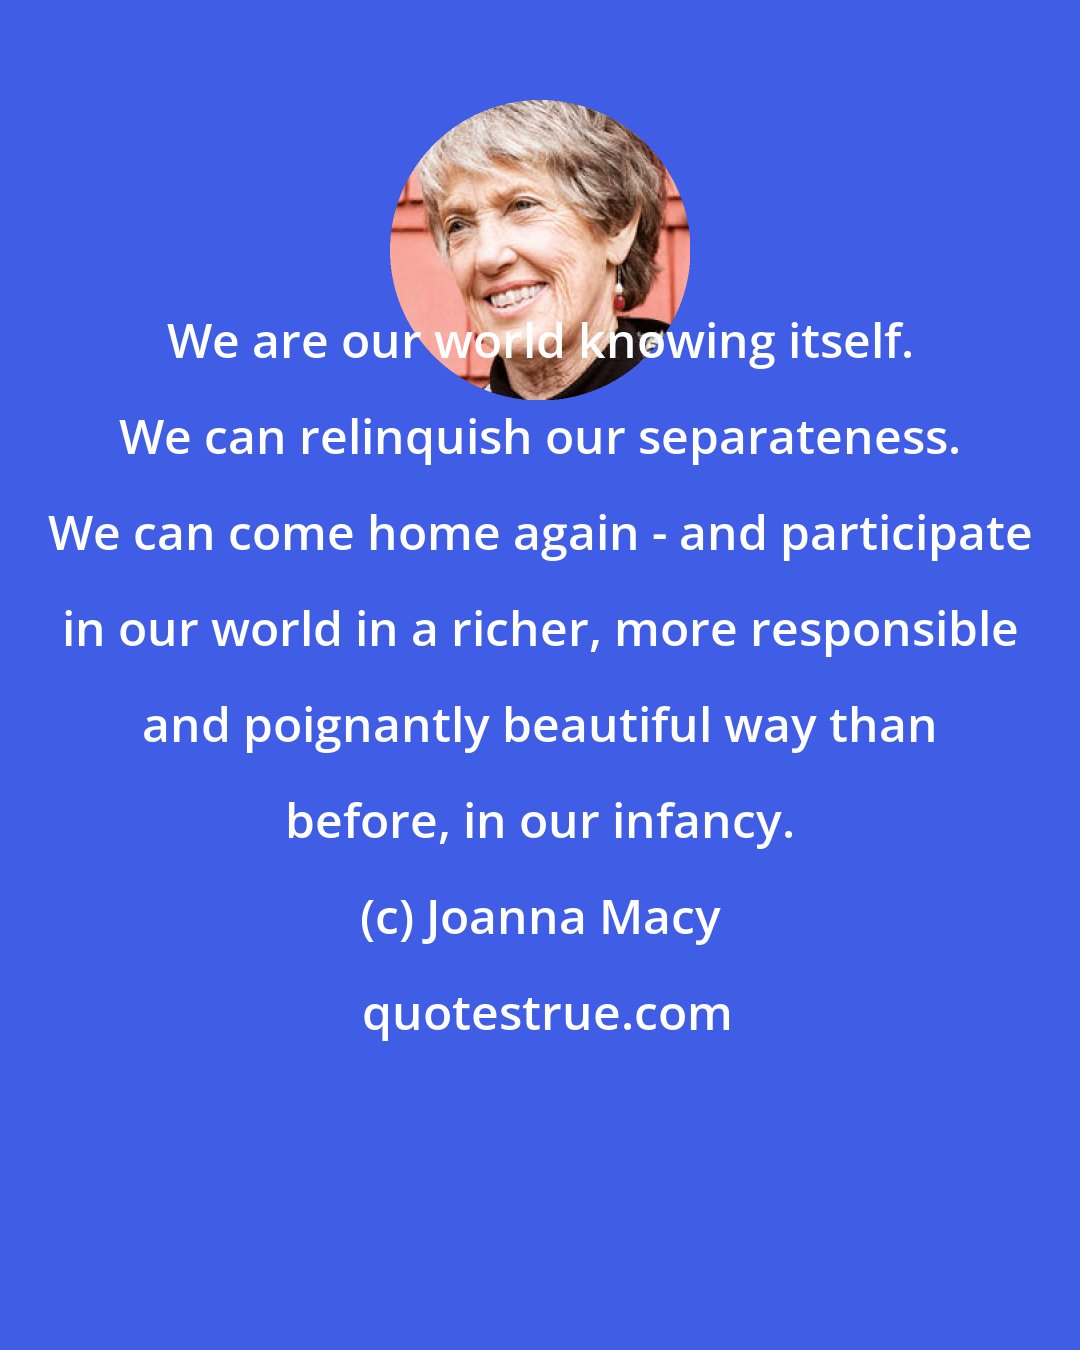 Joanna Macy: We are our world knowing itself. We can relinquish our separateness. We can come home again - and participate in our world in a richer, more responsible and poignantly beautiful way than before, in our infancy.